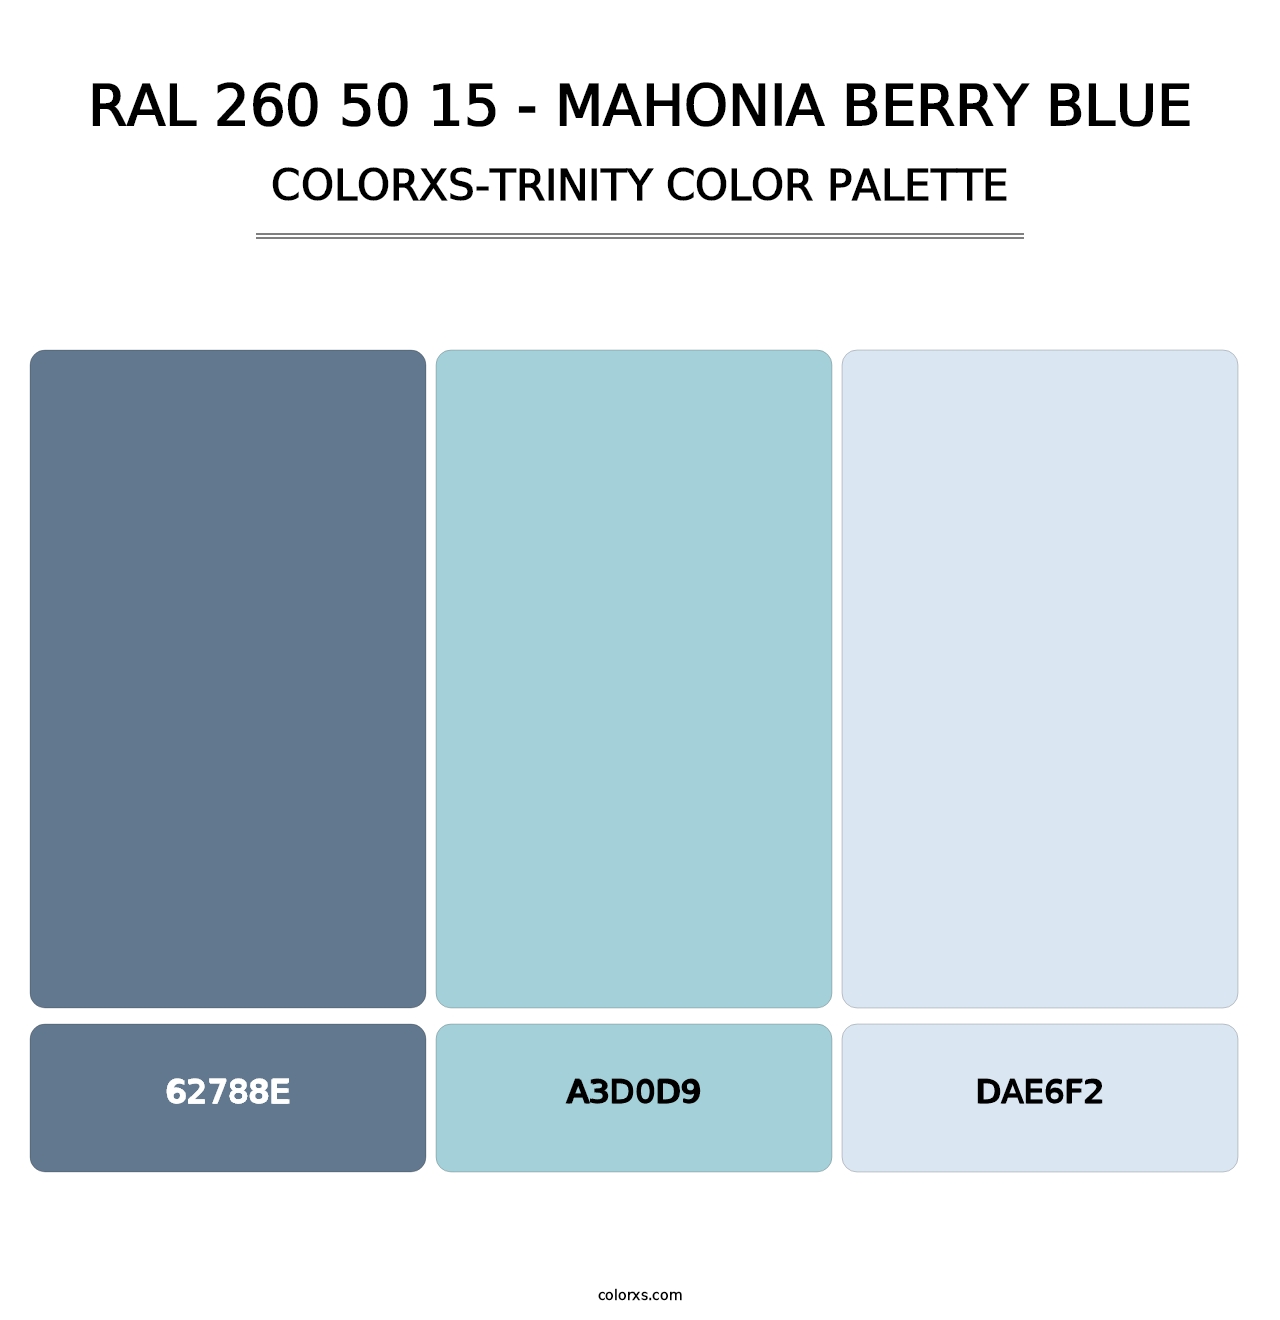 RAL 260 50 15 - Mahonia Berry Blue - Colorxs Trinity Palette